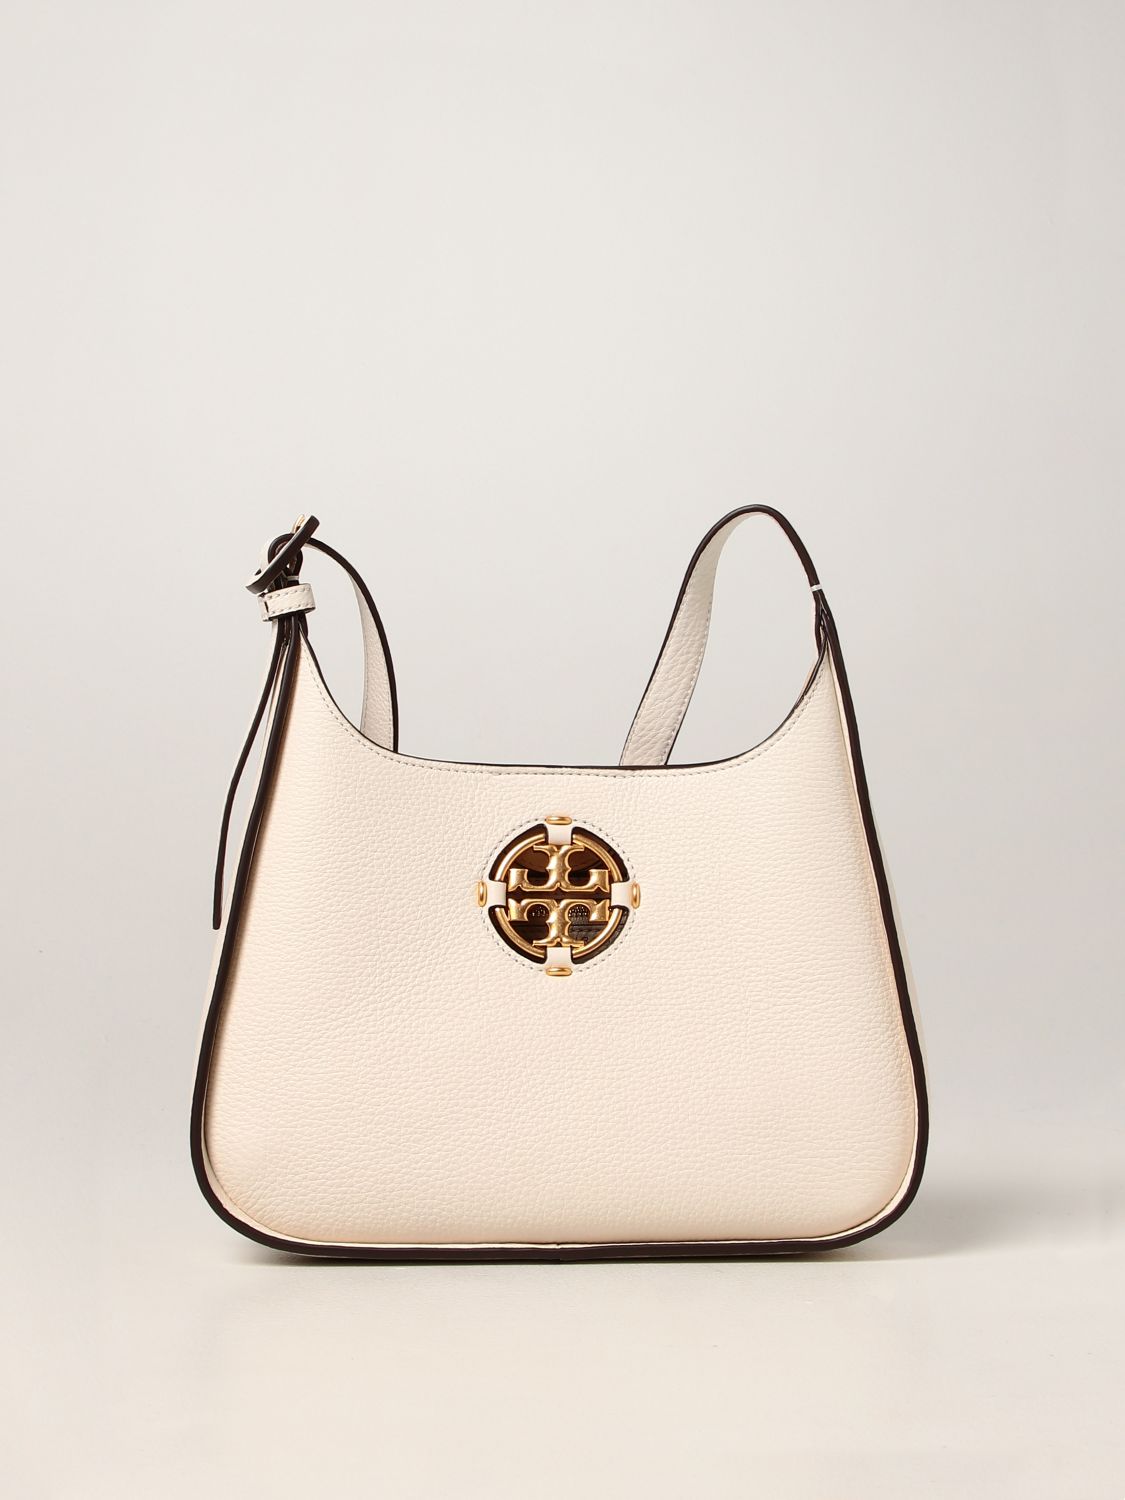 TORY BURCH: Miller small bag in grained leather - Ivory | Tory Burch  crossbody bags 82982 online on 